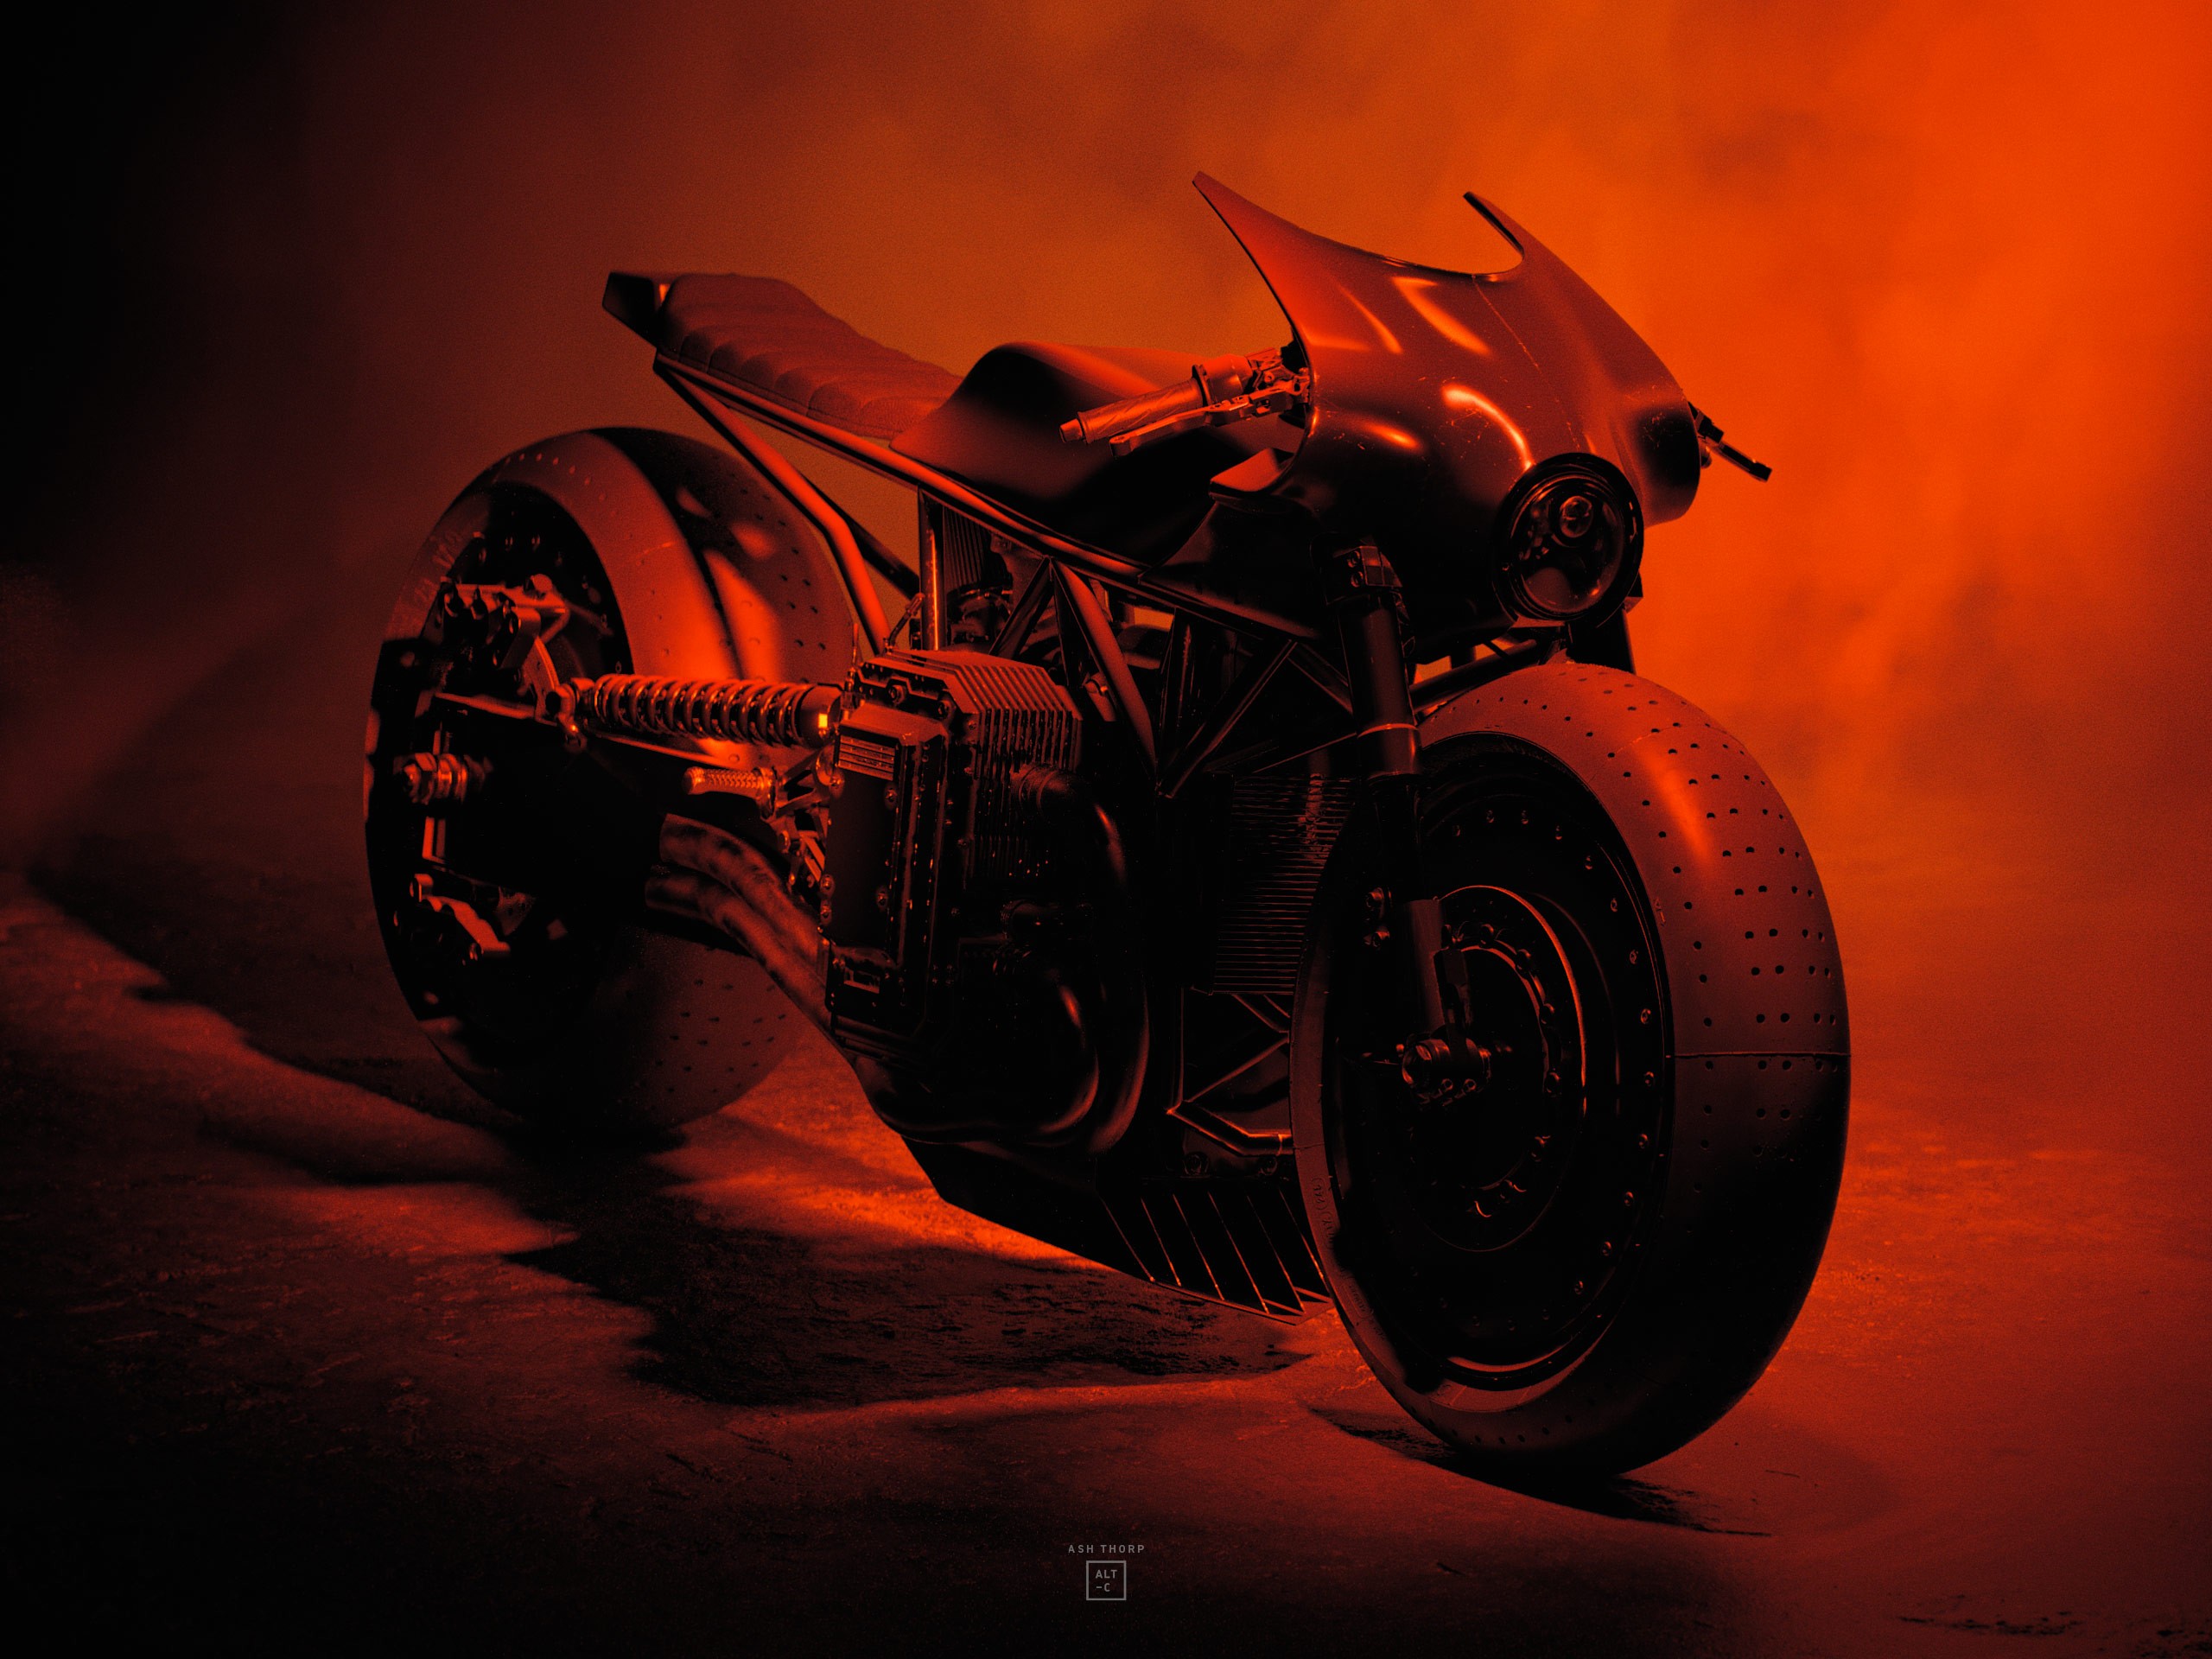 Bruce Wayne's new Batcycle looks like a motorcycle from hell, and we love  it! - Adrenaline Culture of Motorcycle and Speed